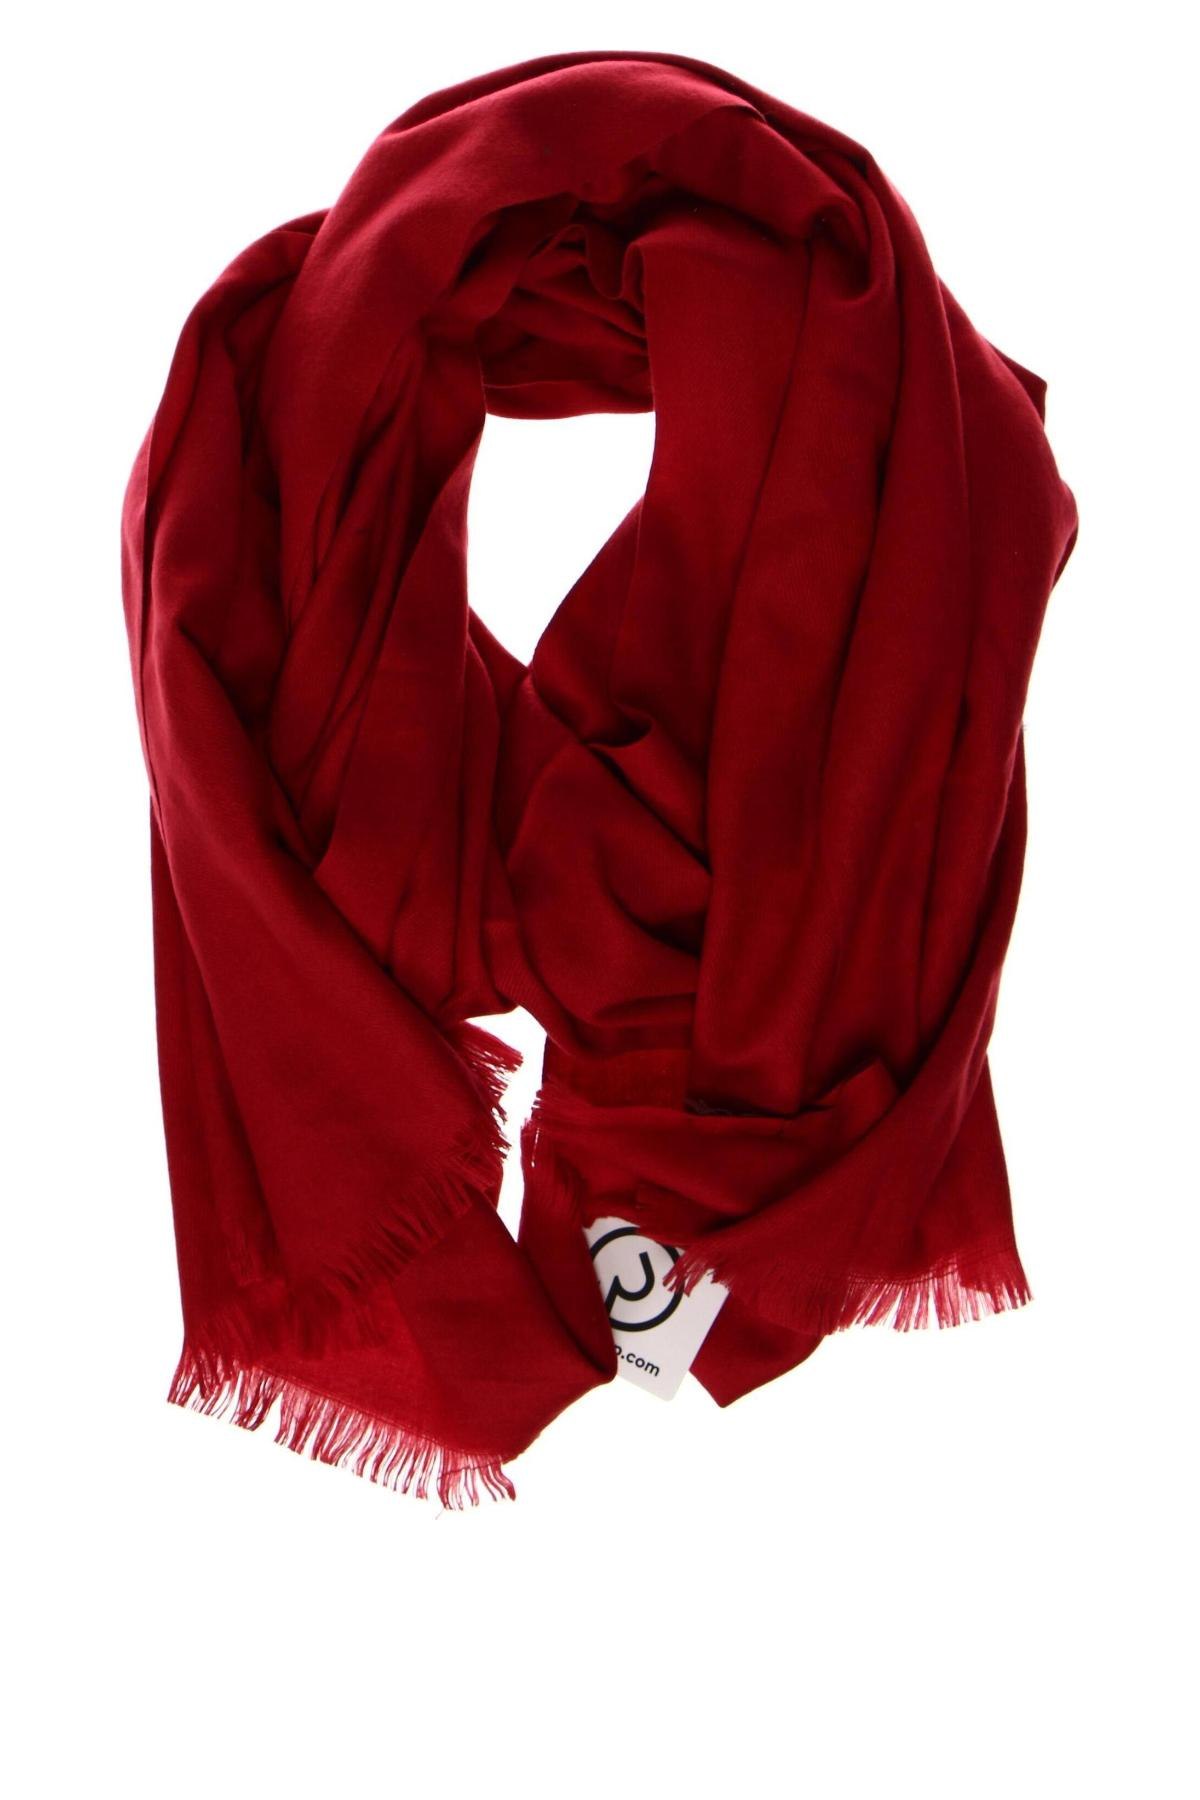 Schal McNeal, Farbe Rot, Preis € 22,16